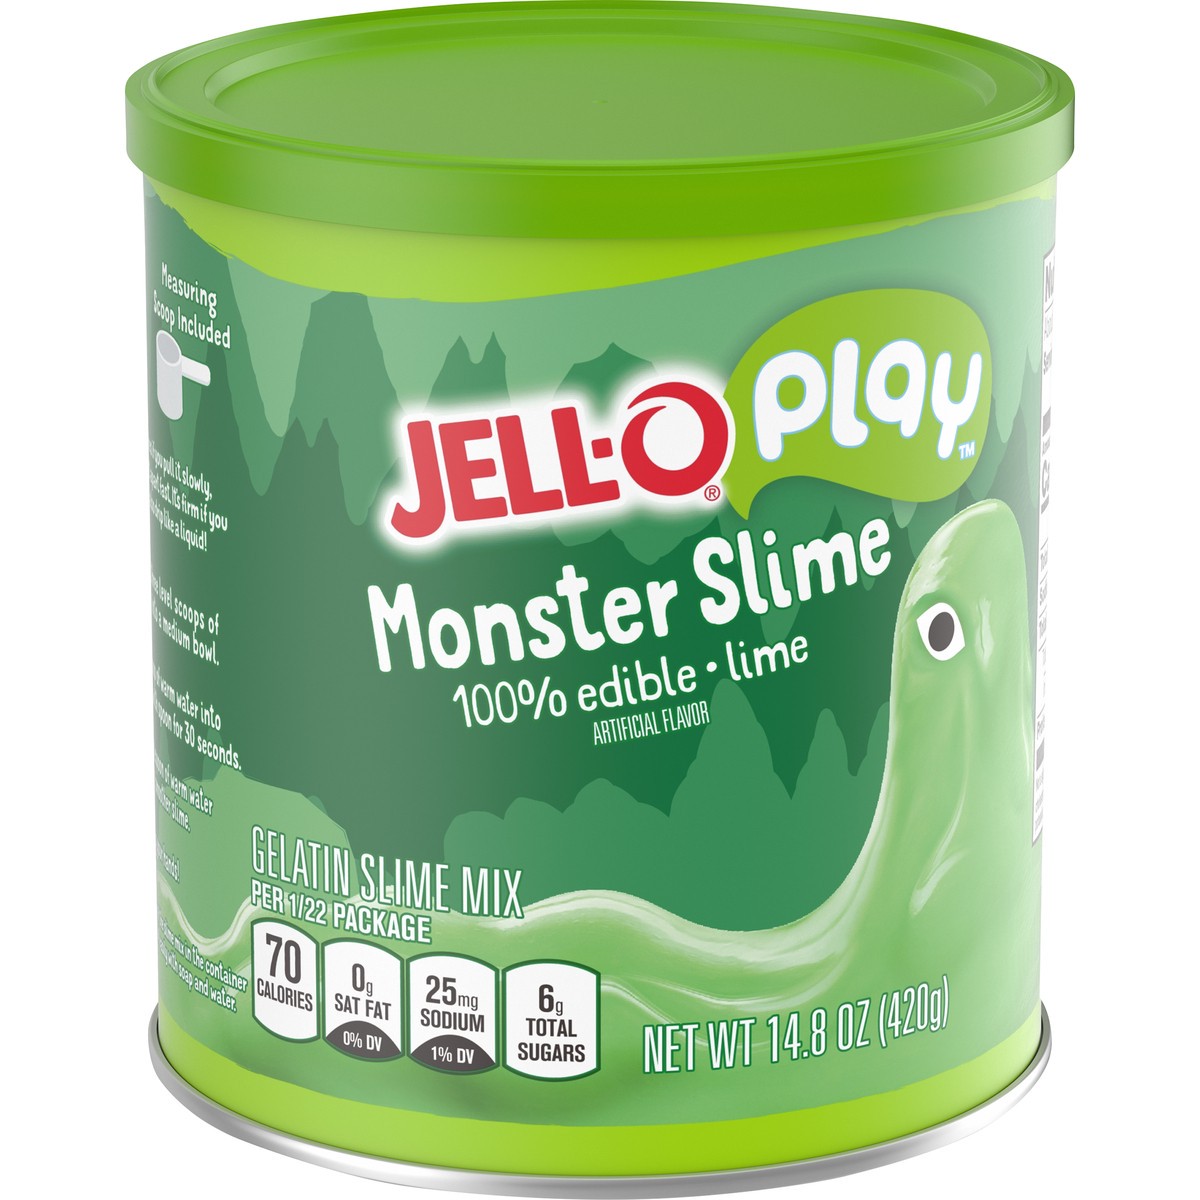 slide 5 of 14, Jell-O Play Monster Slime Kit with 100% Edible Lime Gelatin Mix, 14.8 oz Canister, 14.8 oz